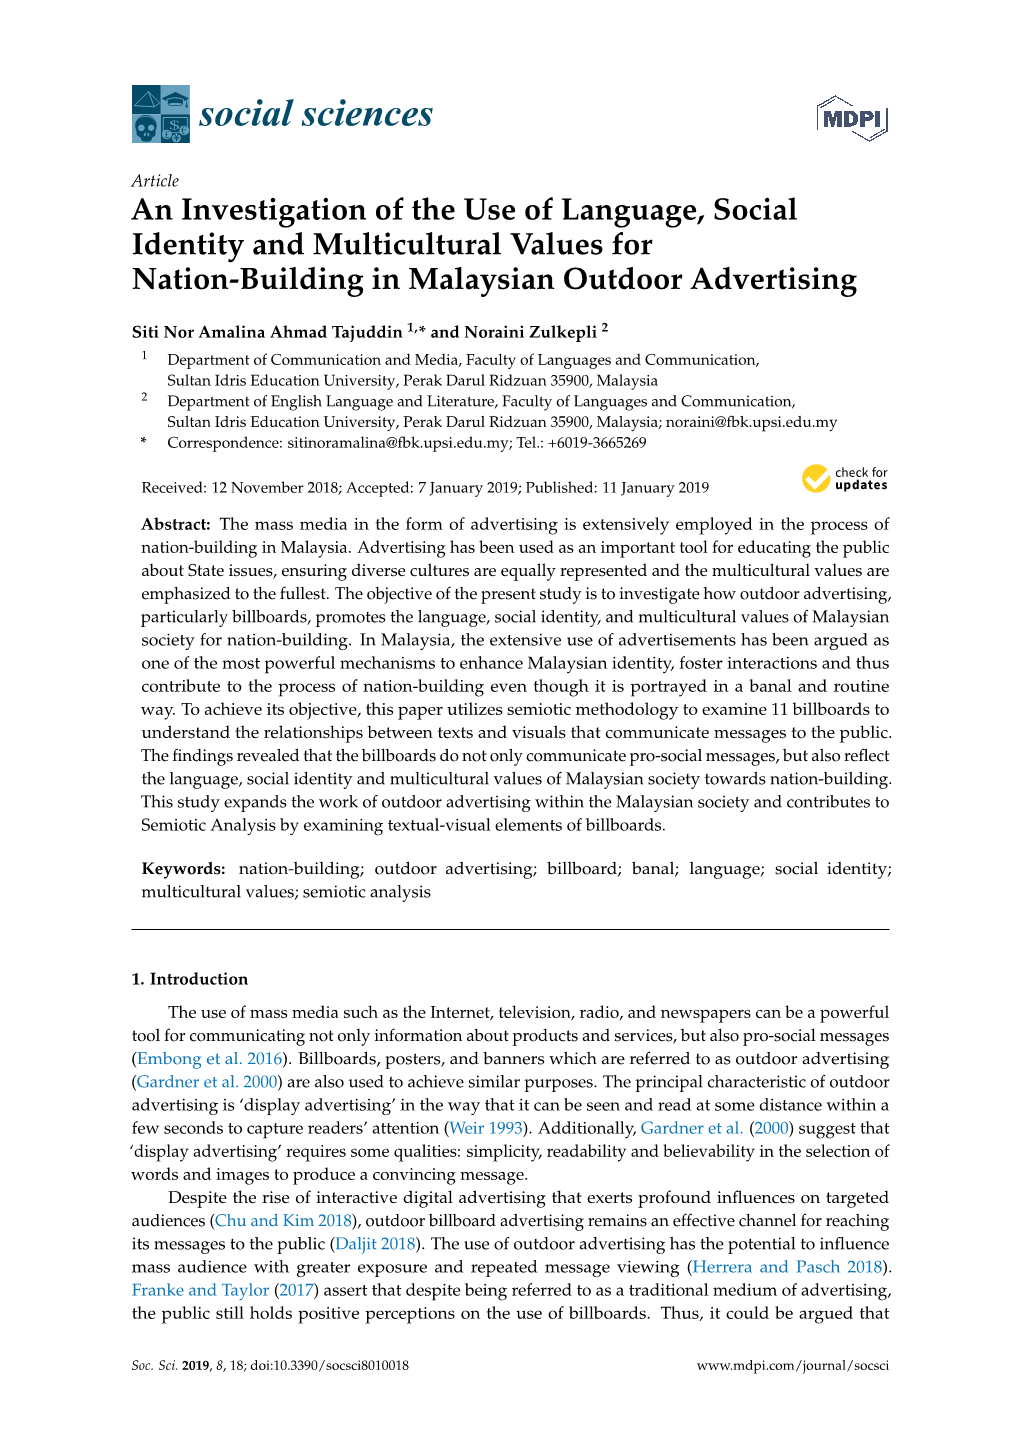 An Investigation of the Use of Language, Social Identity and Multicultural Values for Nation-Building in Malaysian Outdoor Advertising